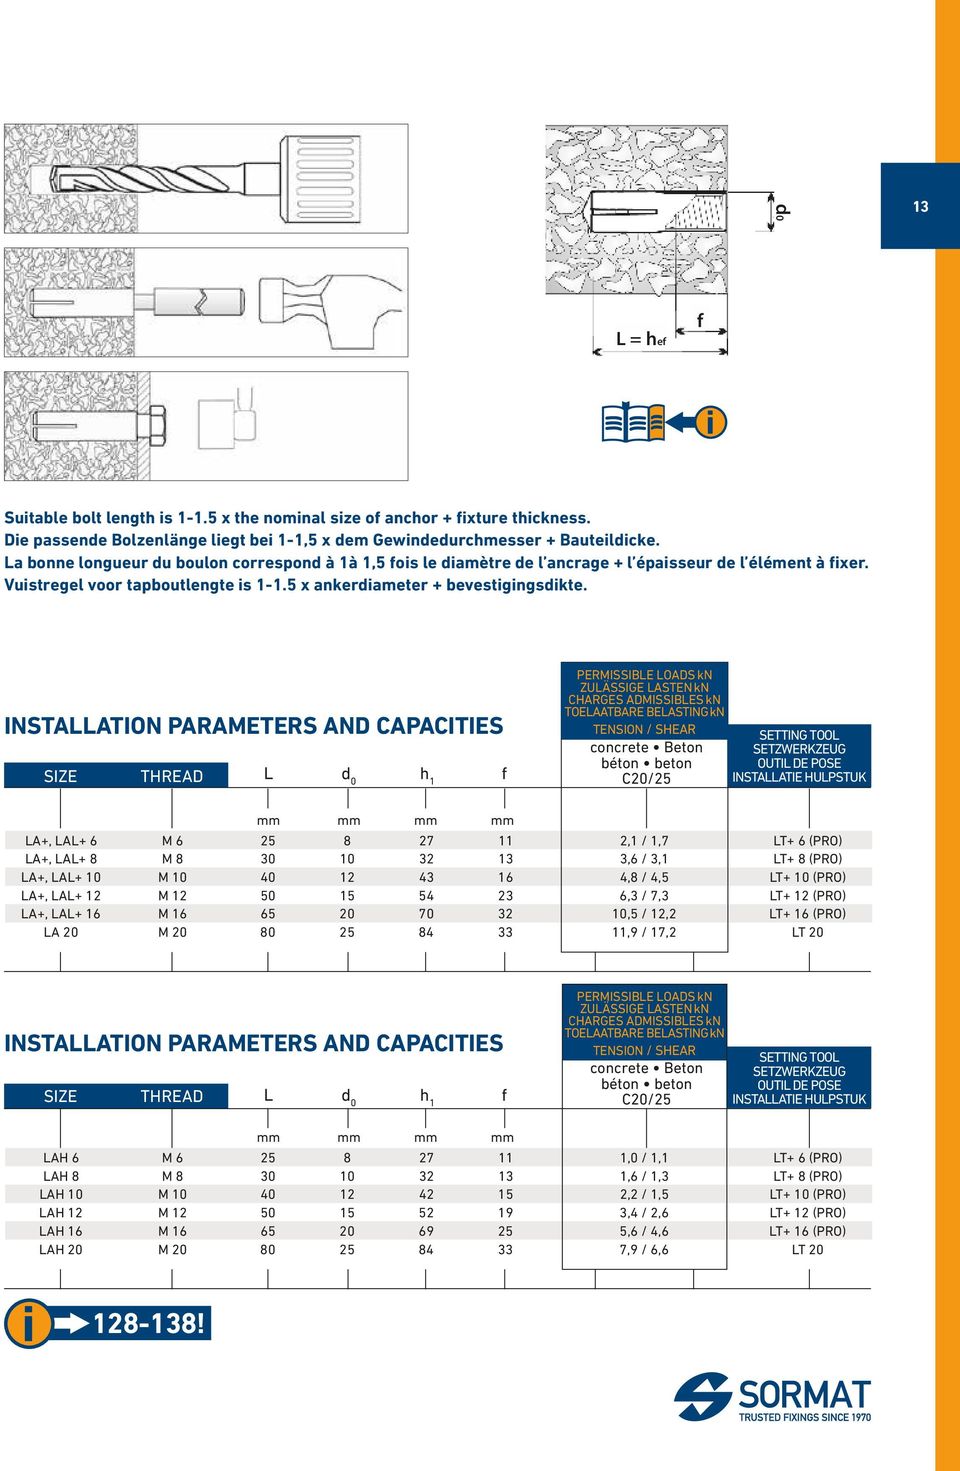 INSTALLATION PARAMETERS AND CAPACITIES SIZE THREAD L d 0 h 1 f PERMISSIBLE LOADS kn ZULÄSSIGE LASTEN kn CHARGES ADMISSIBLES kn TOELAATBARE BELASTING kn TENSION / SHEAR concrete Beton béton beton